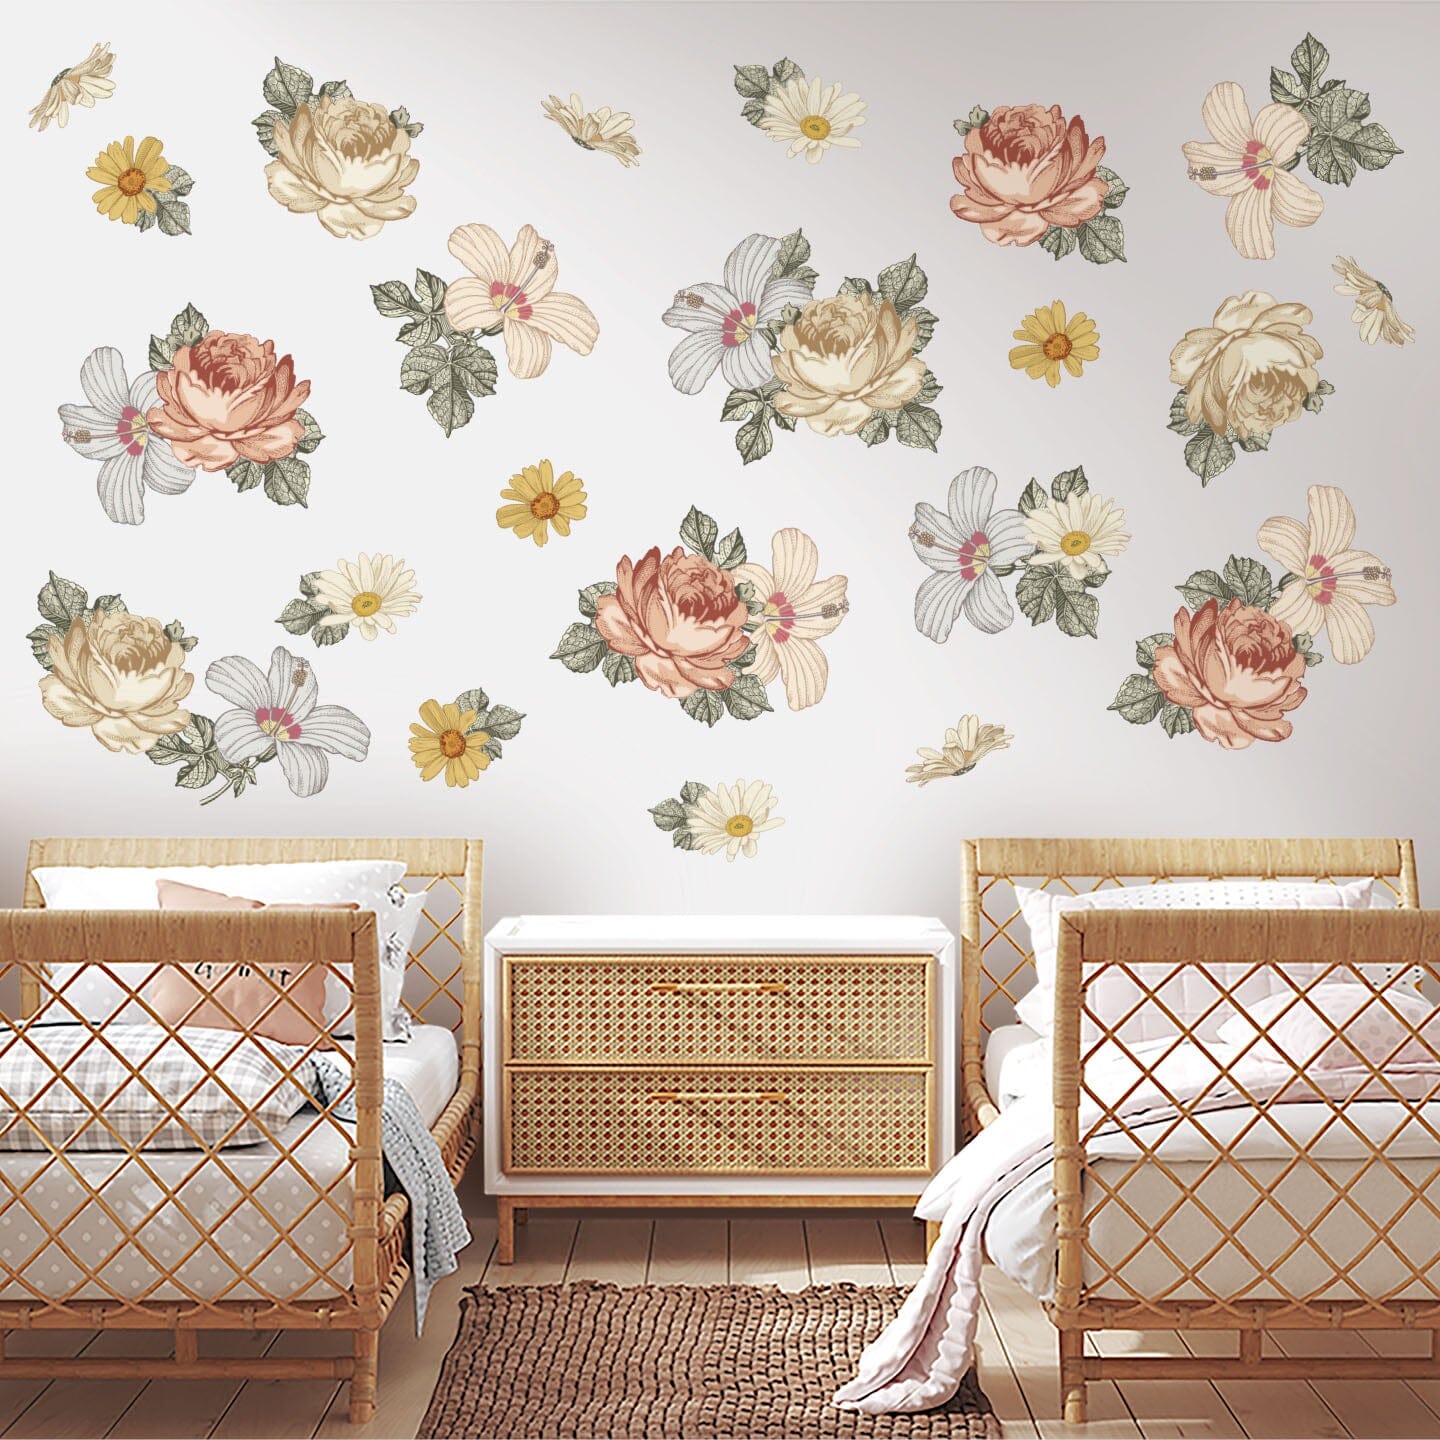 Mellow Yellow Rose Flower Wall Decor Set of Two 3d floral wall art